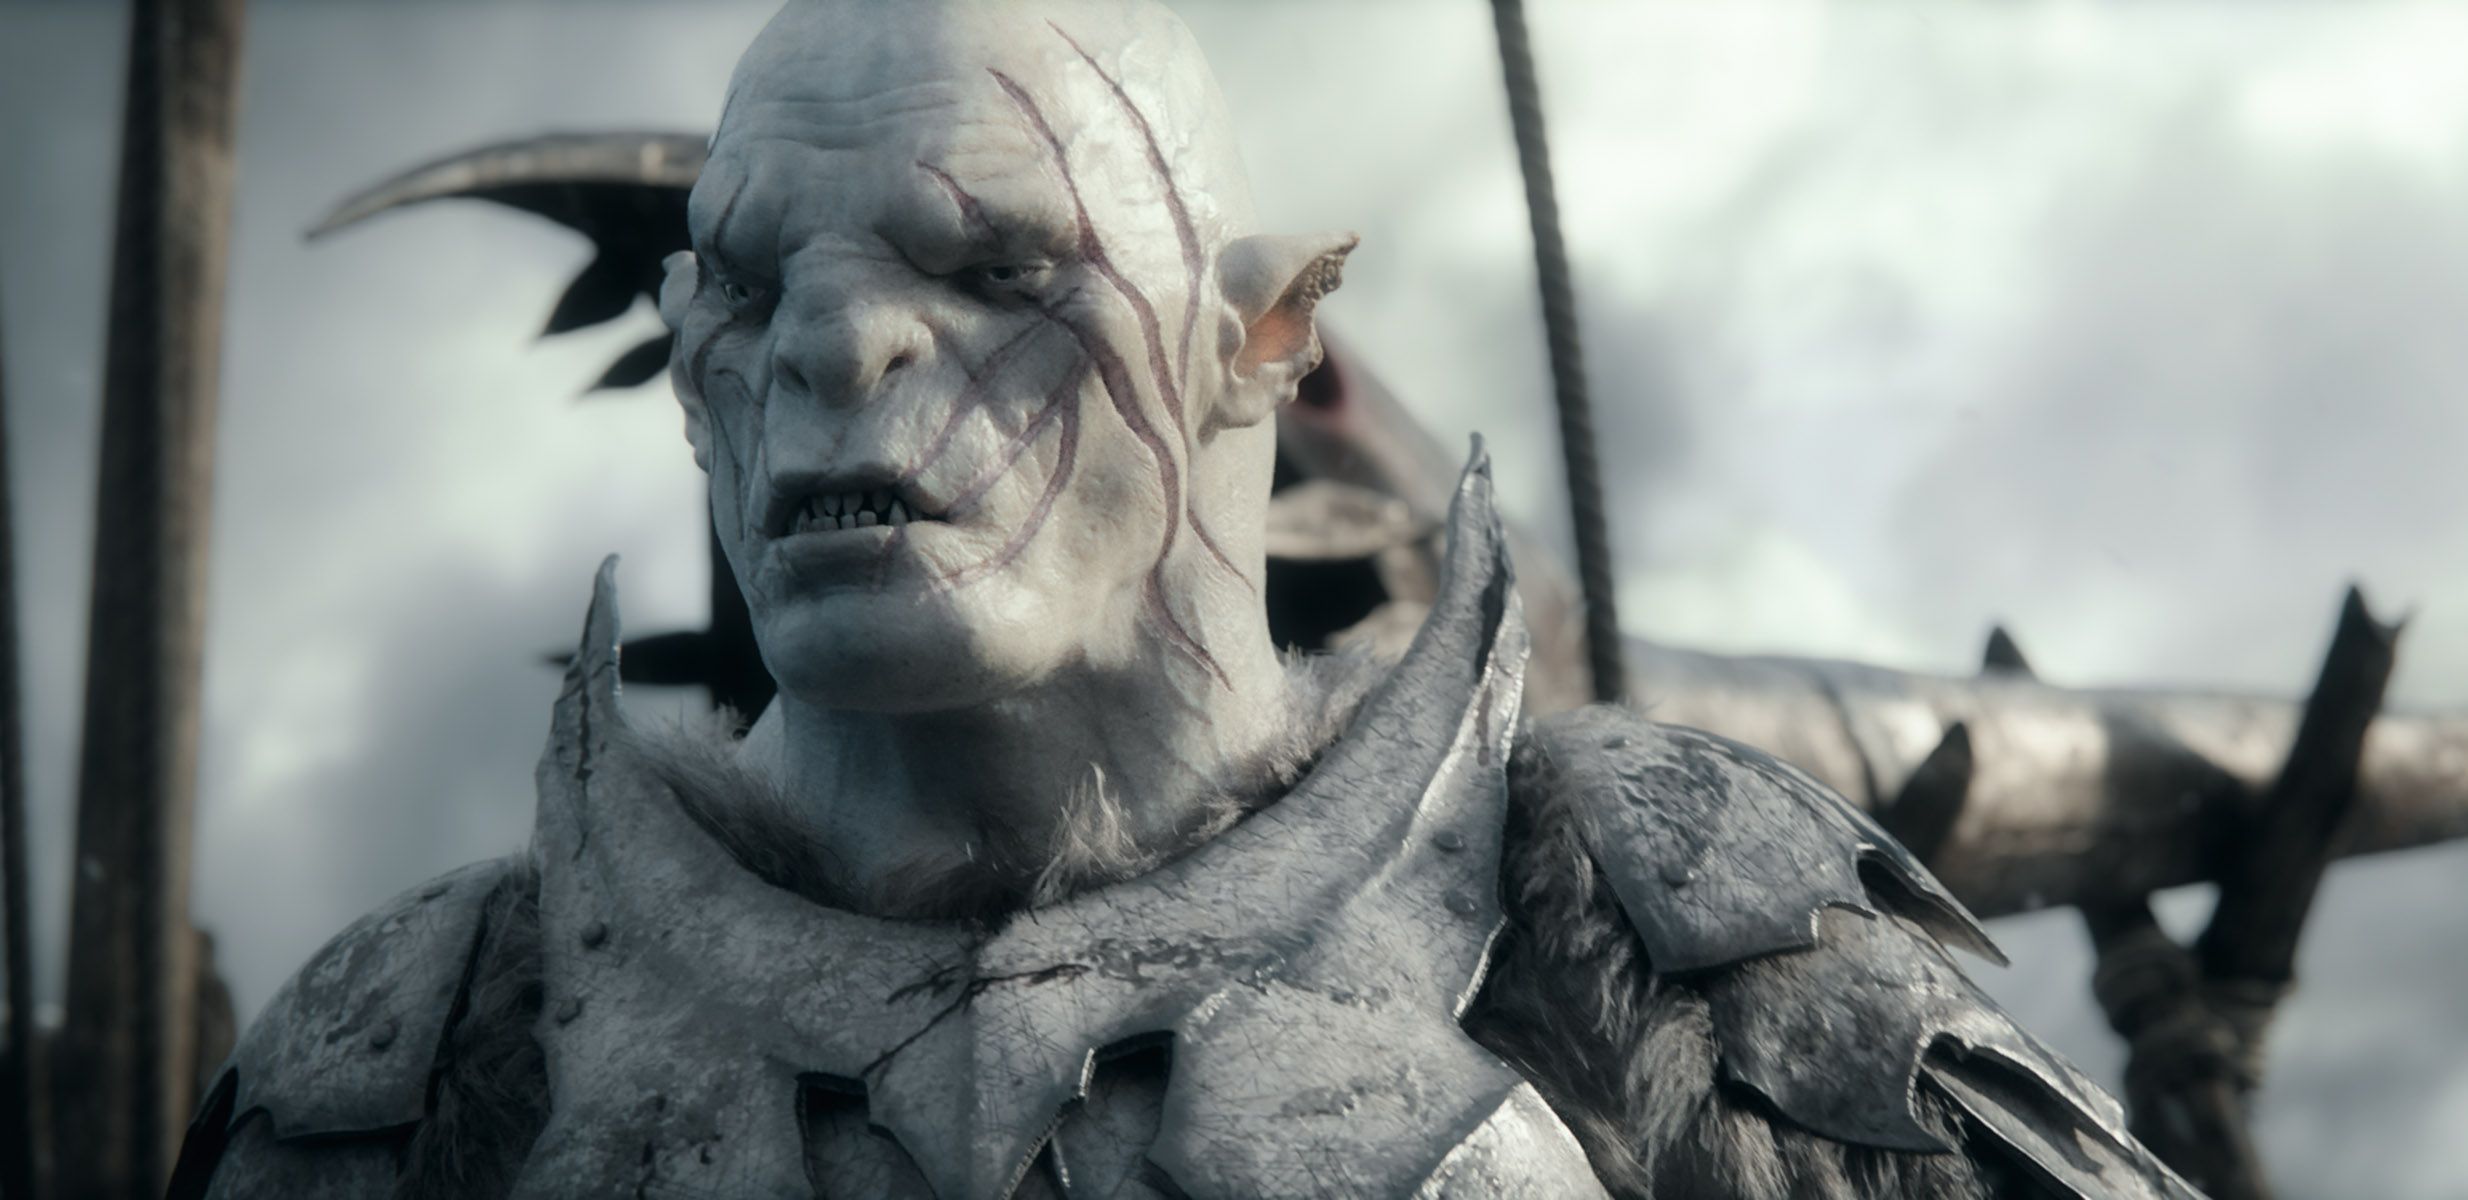 Azog, commander of the Moria orcs - The Battle of the Five A